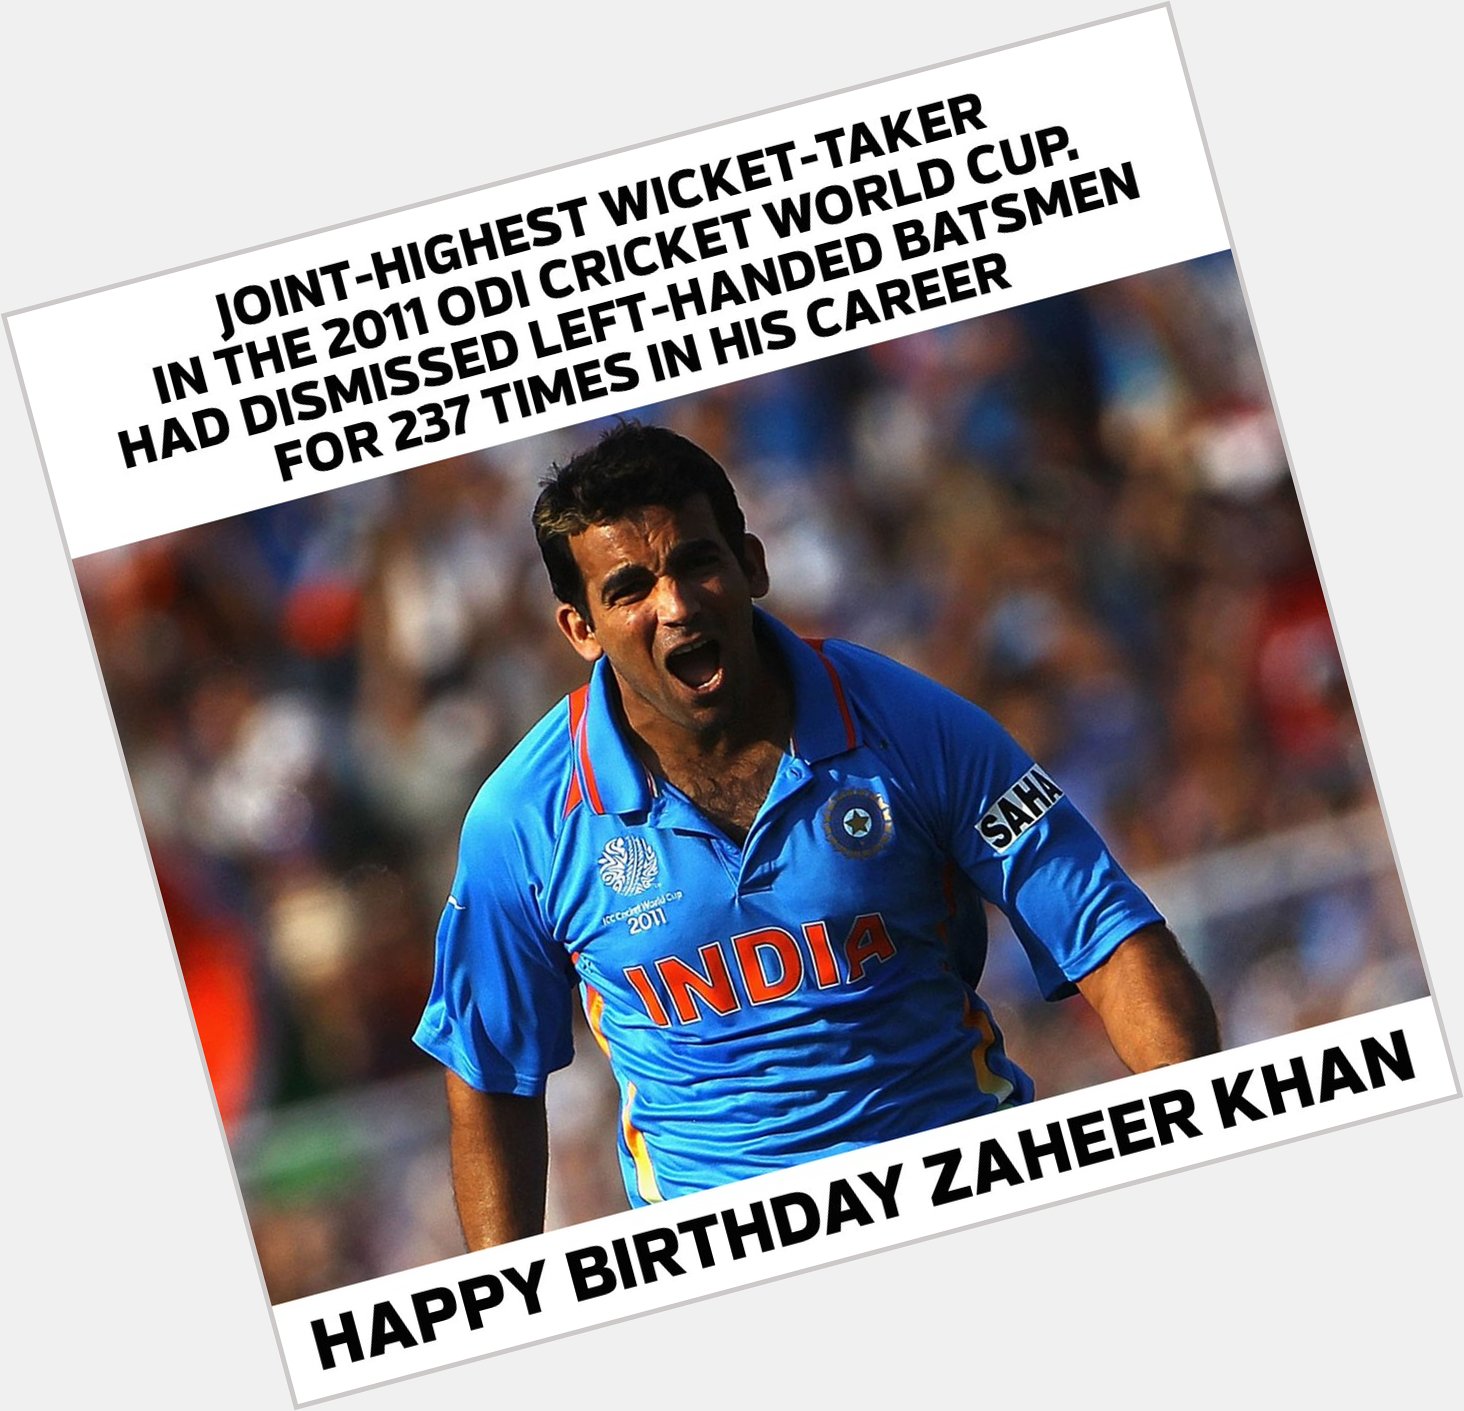 Wishing former Indian pacer Zaheer Khan a very happy birthday.    